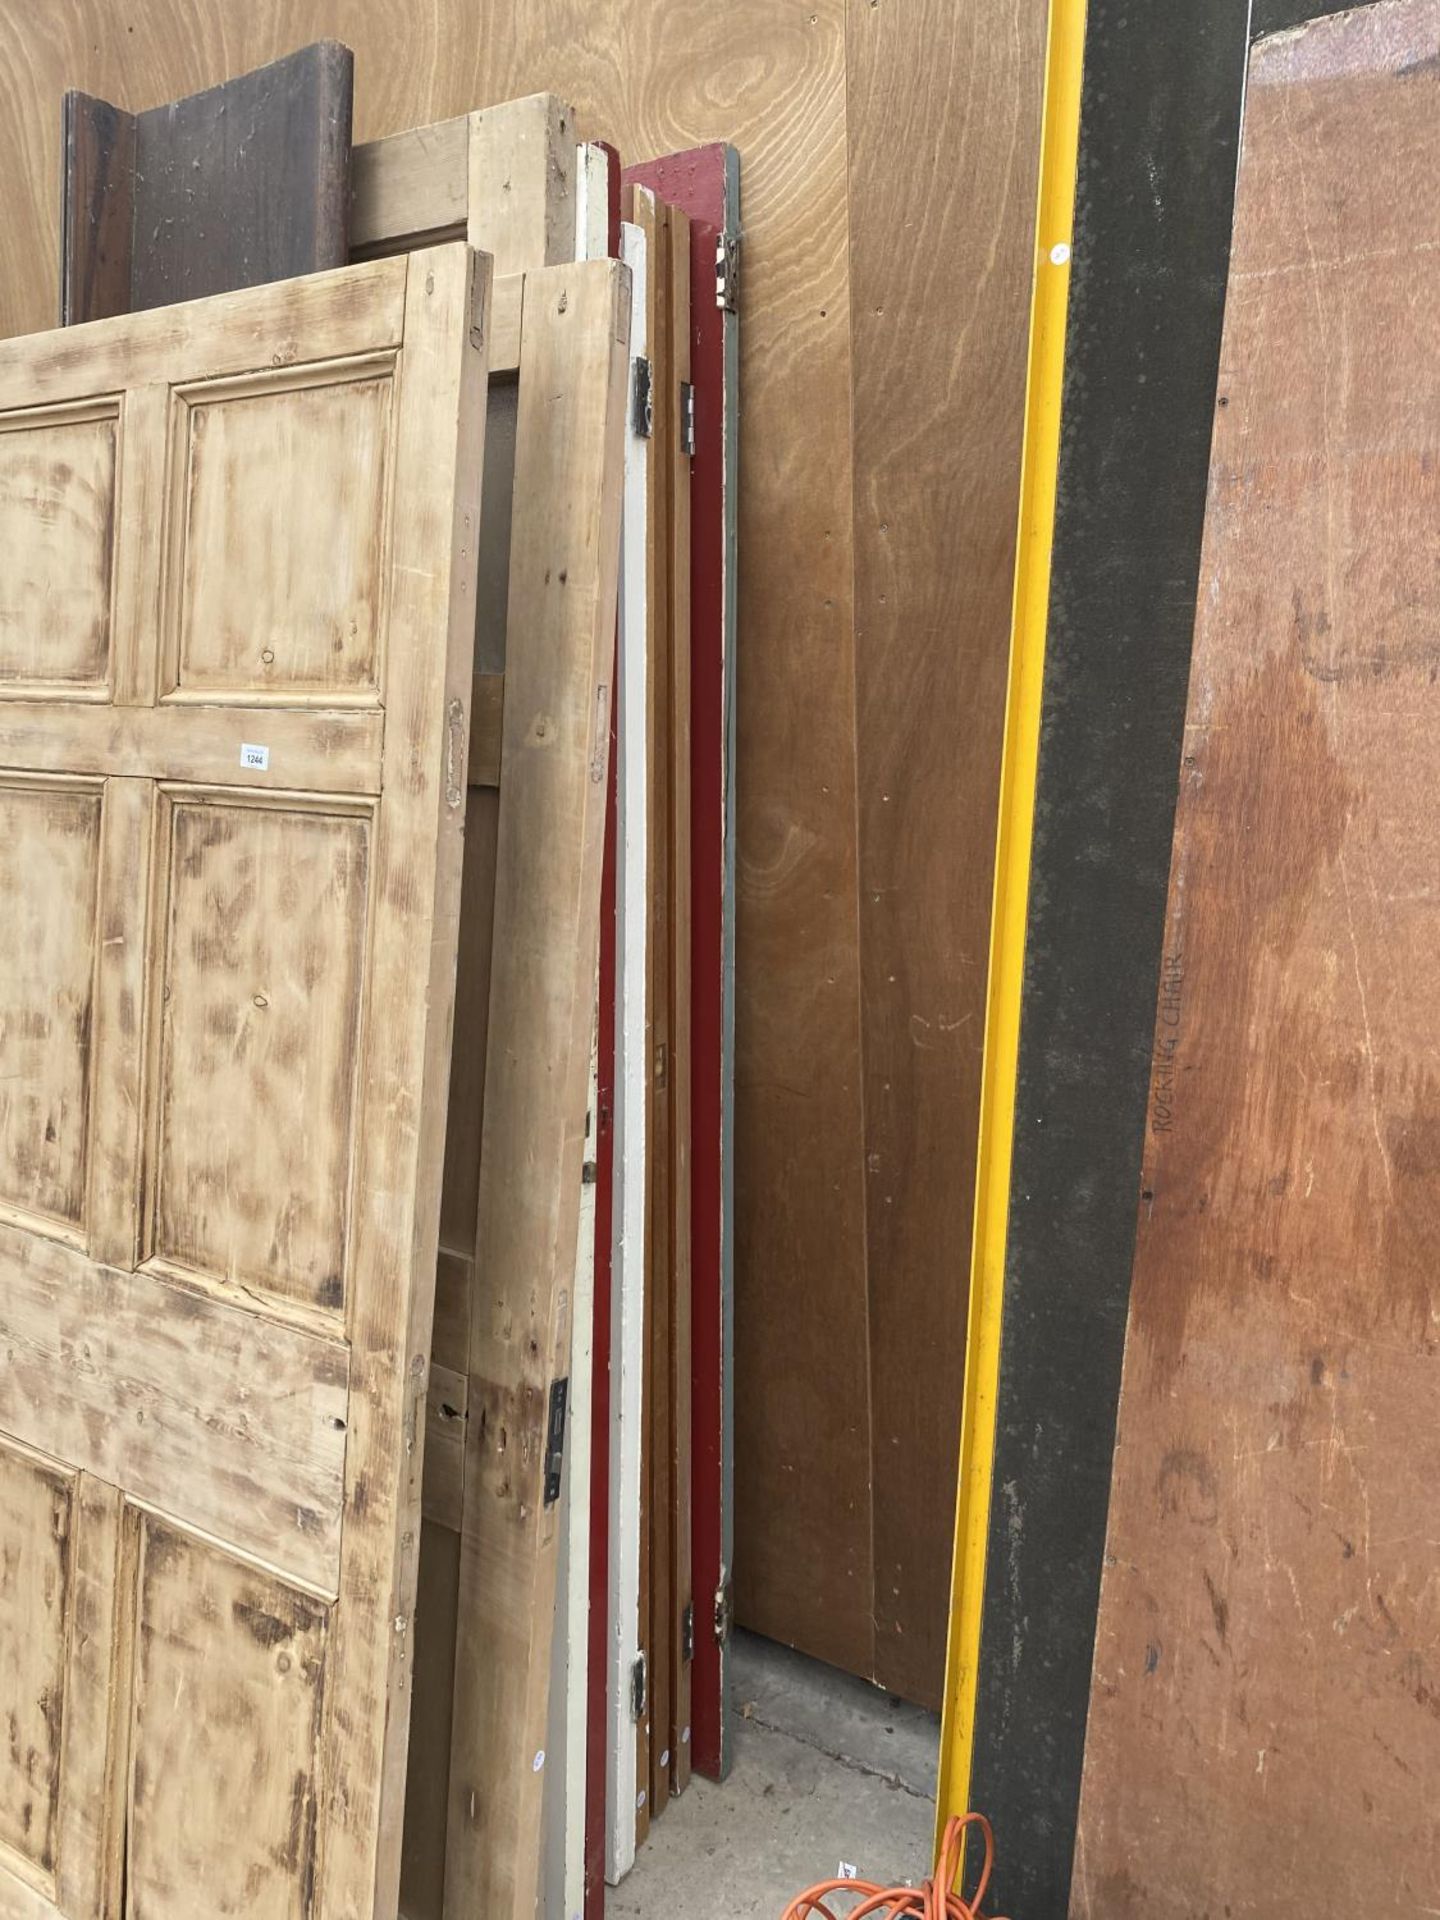 A LARGE COLLECTION OF WOODEN DOORS - Image 3 of 3